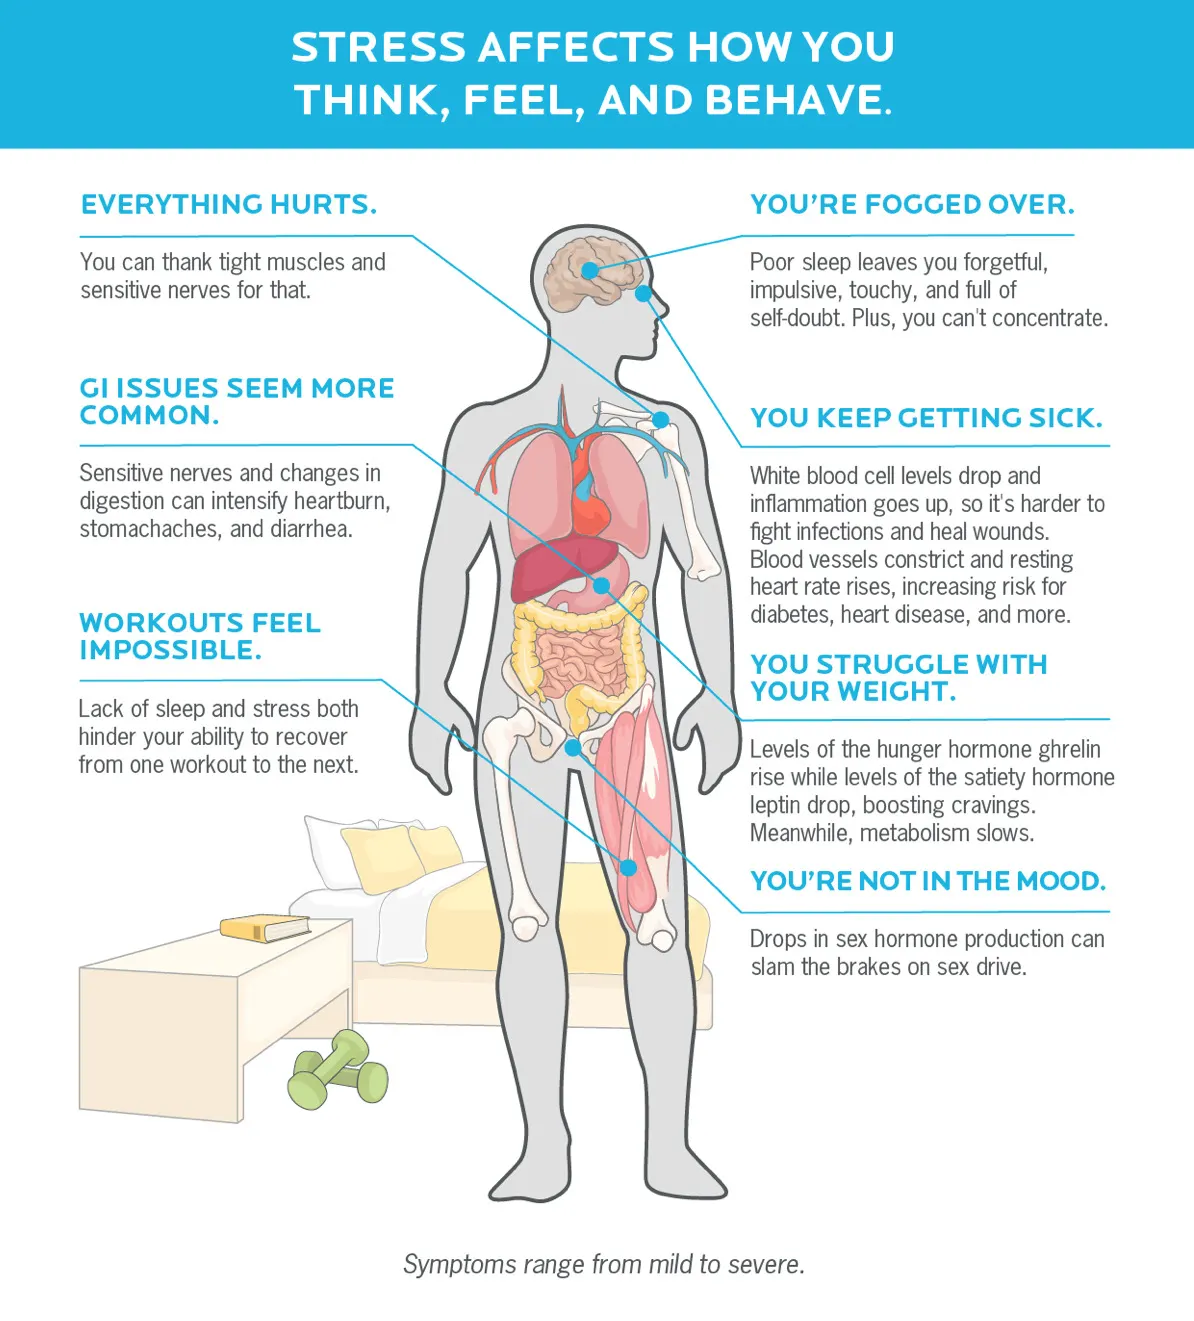 Your body under stress